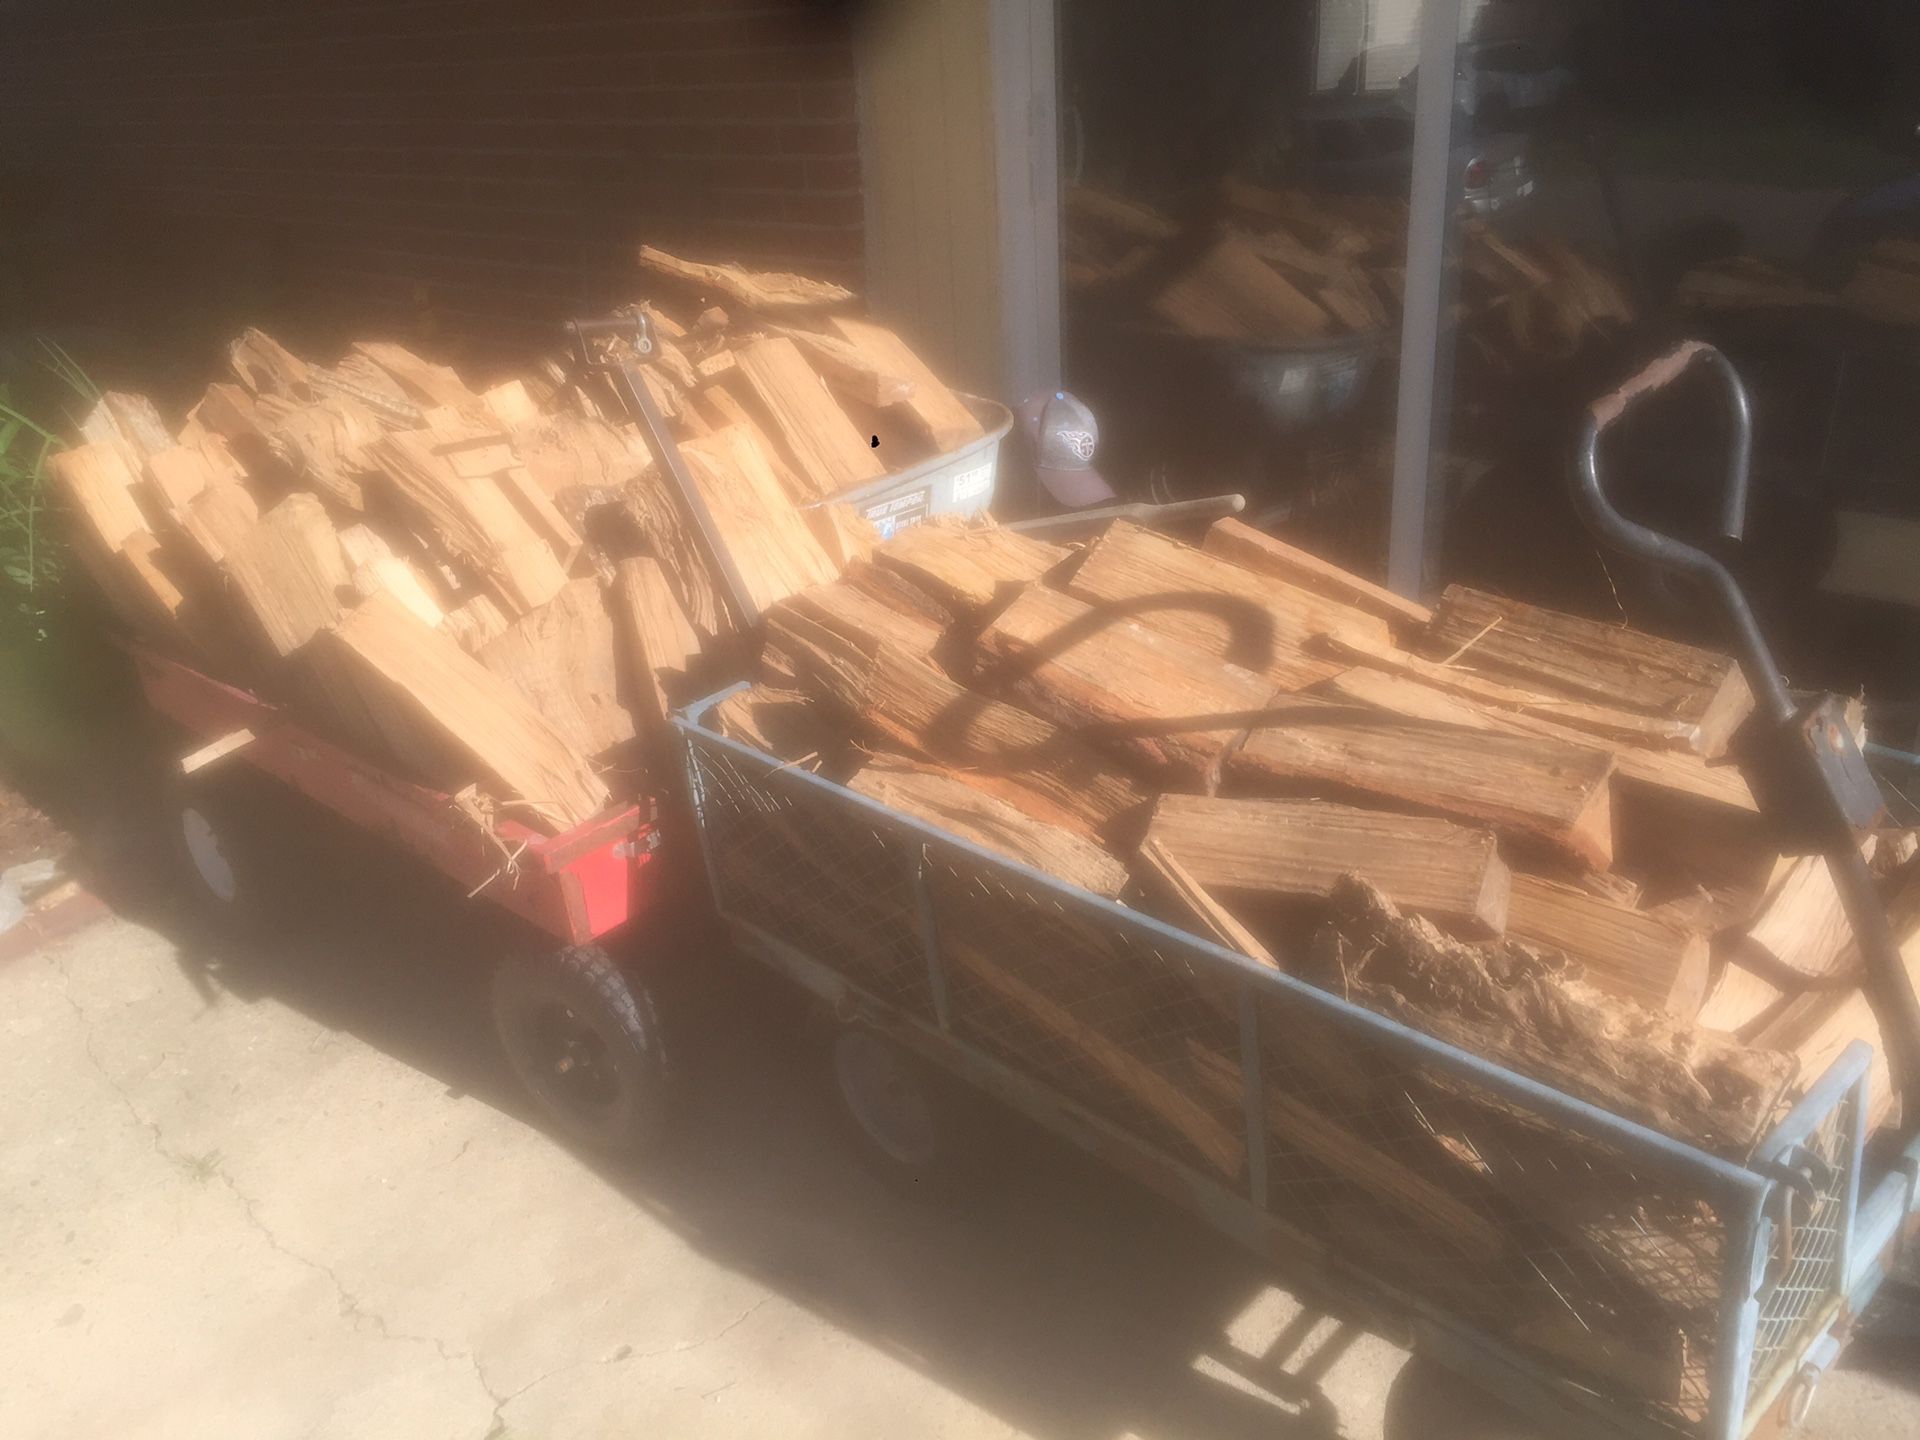 25 bucks for a cart full of firewood or two carts for 40 bucks